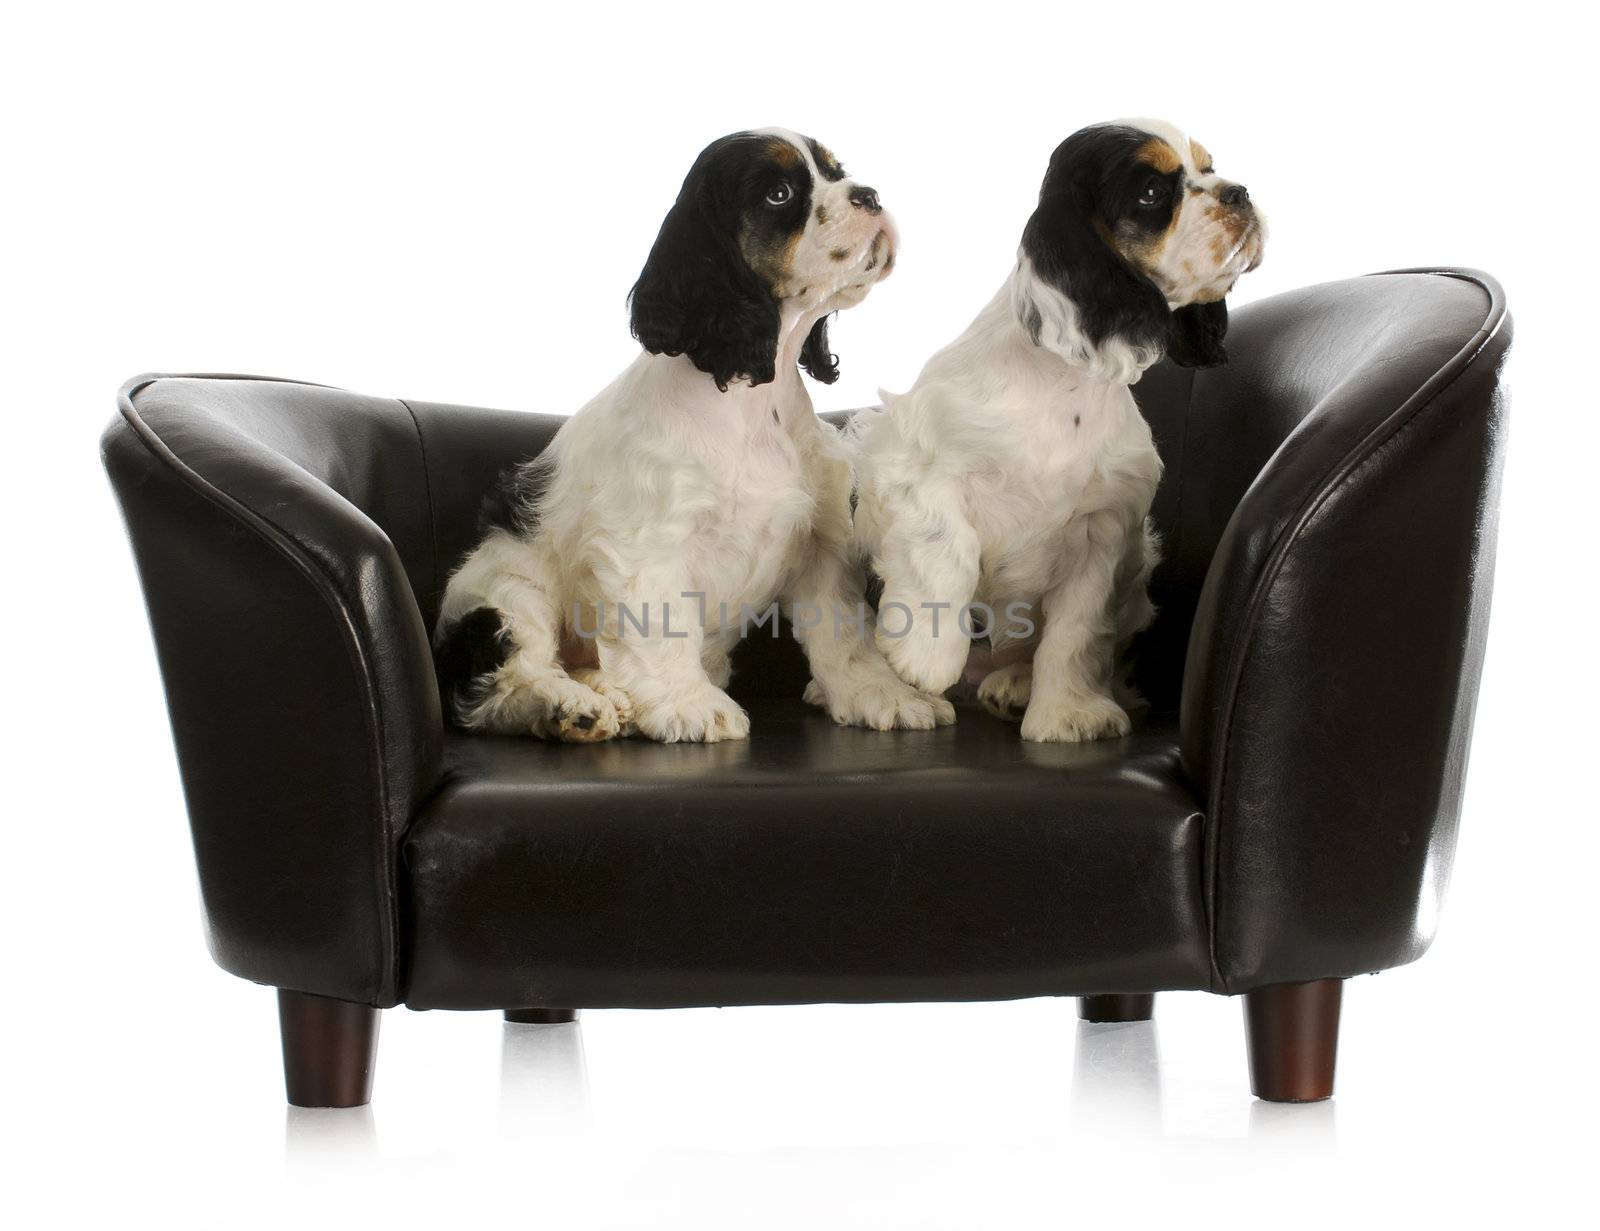 littermates - two cute cocker spaniel puppies sitting on couch looking up